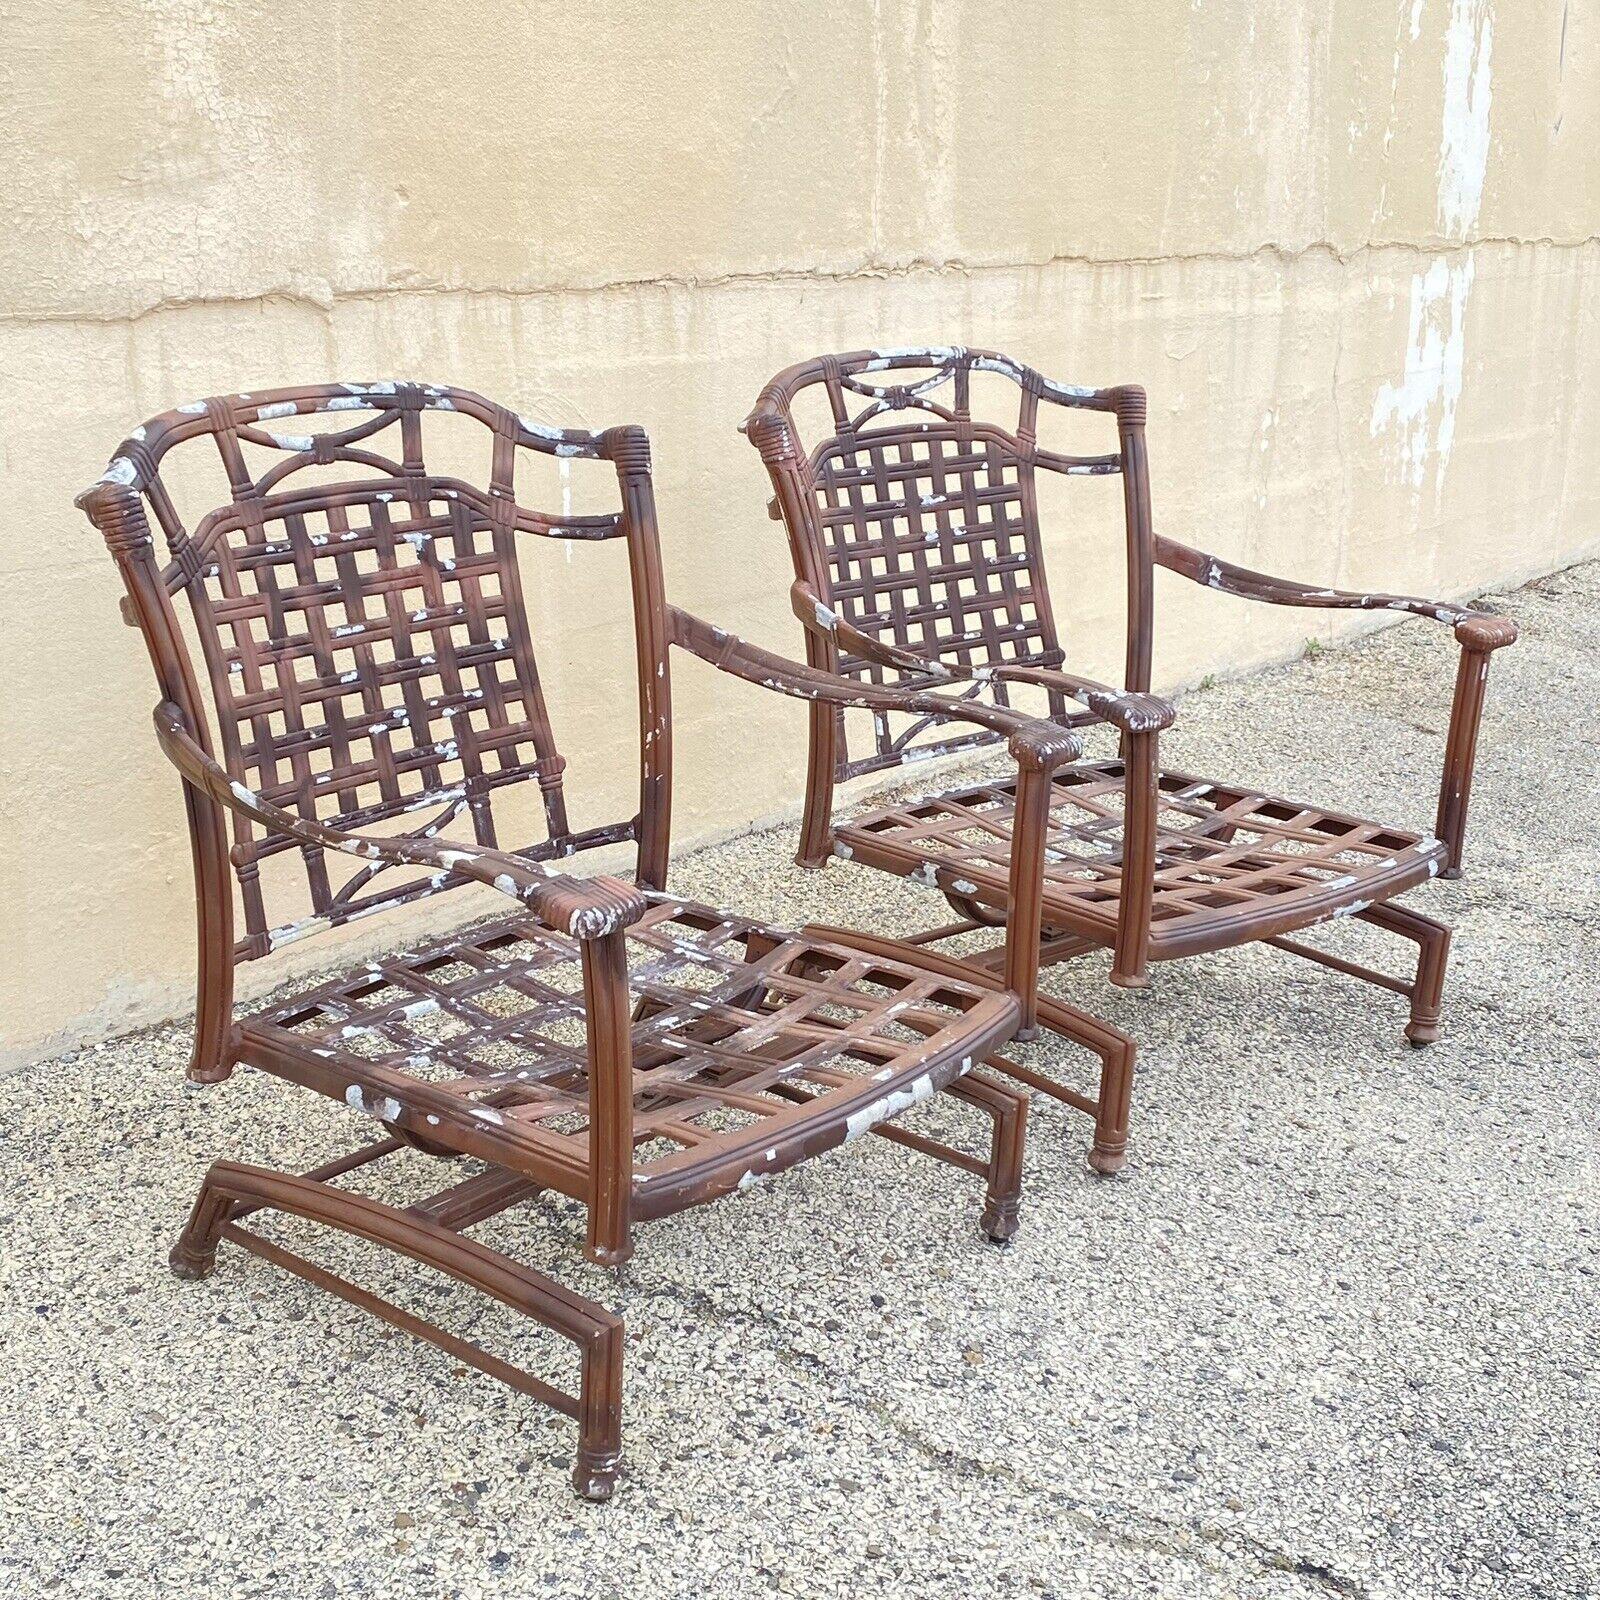 Cast Aluminum Basket Weave Lattice Patio Outdoor Rocking Lounge Chairs - a Pair In Good Condition For Sale In Philadelphia, PA